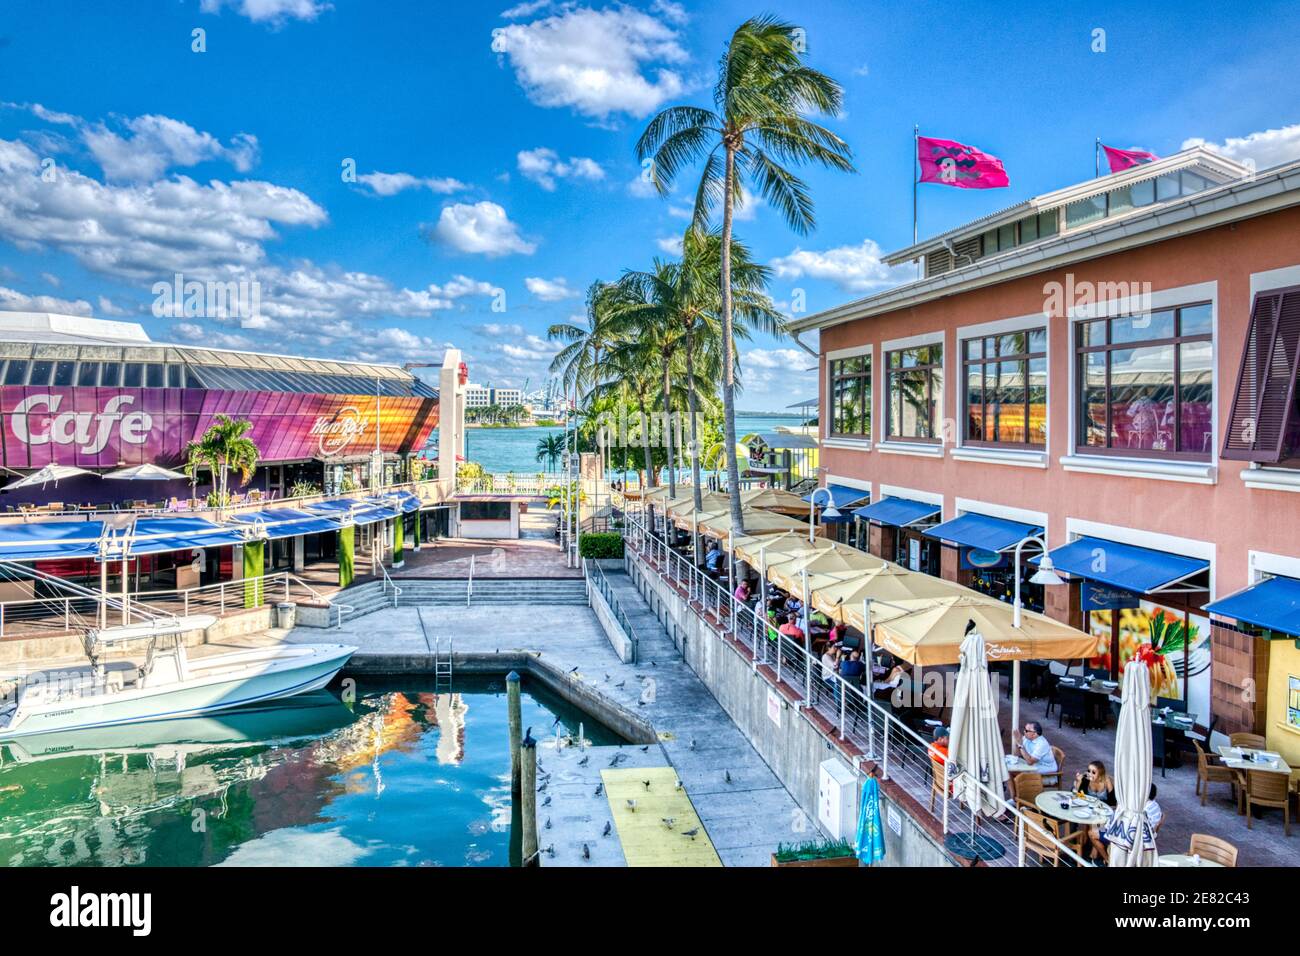 The Bayfront Marketplace Marina located on Biscayne Bay in Miami, Florida. Stock Photo